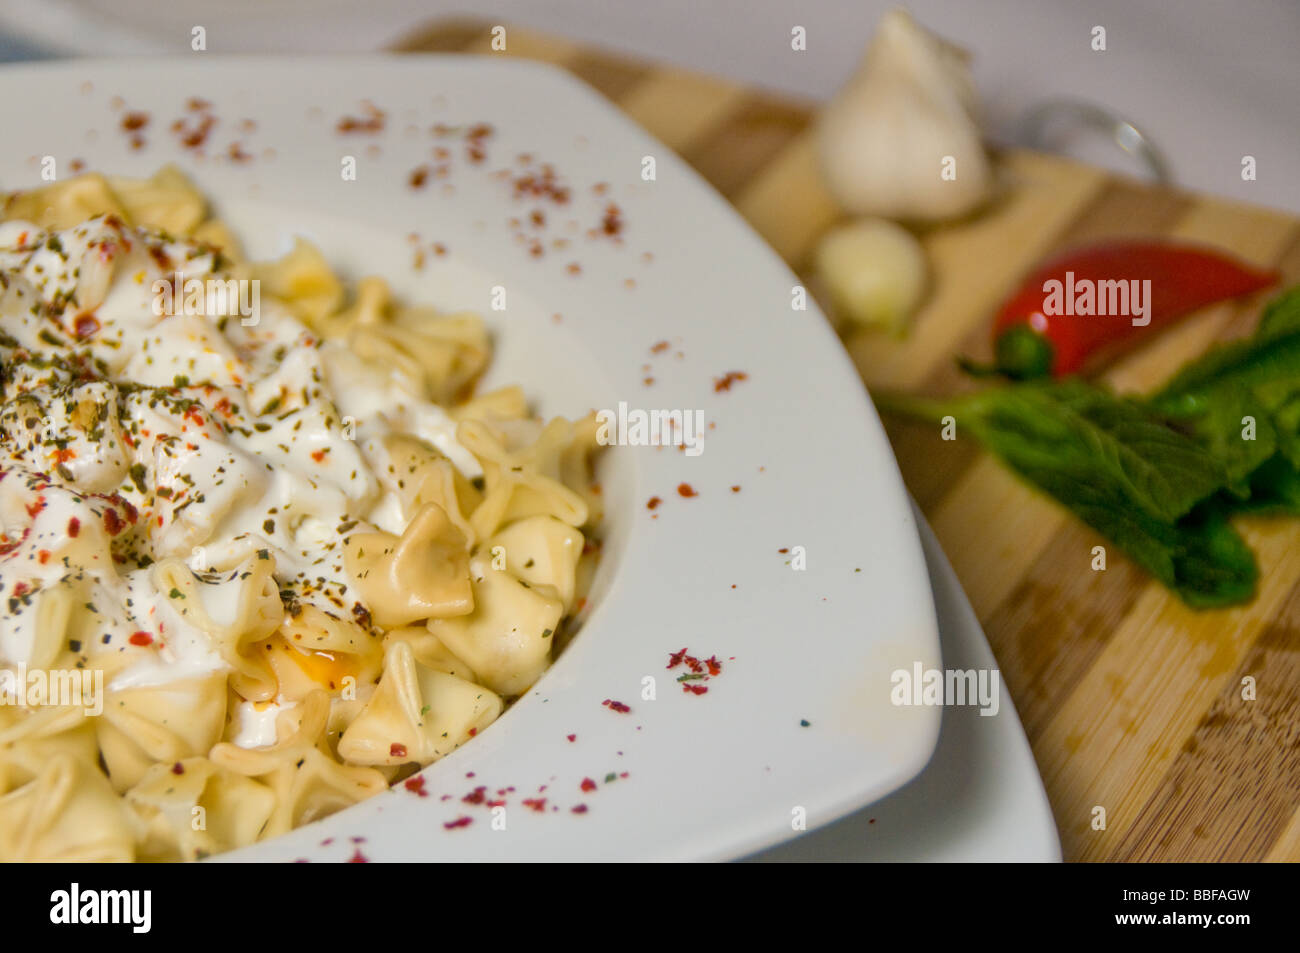 Turkish cuisine, manti (dumplings), boiled and served with yogurt, mint and chilli peper Stock Photo